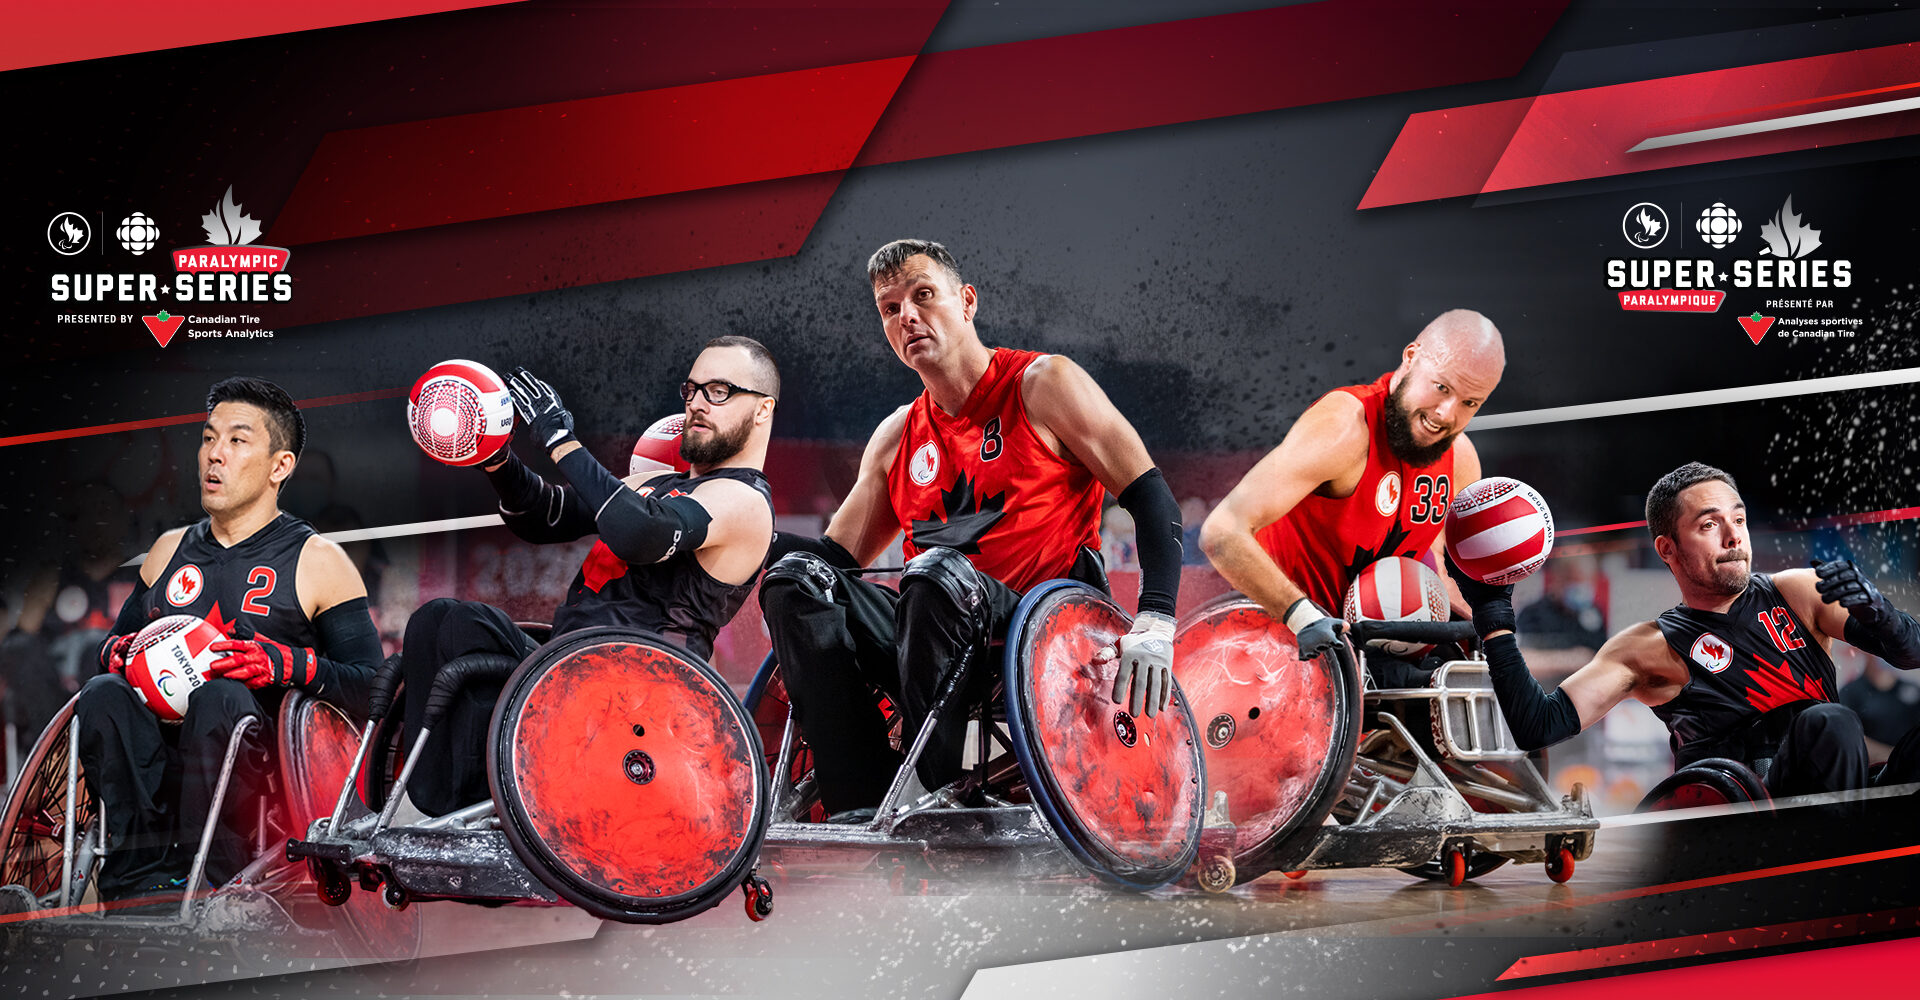 Paralympic Super Series to feature 2022 Wheelchair Rugby World Championship, October 11-16